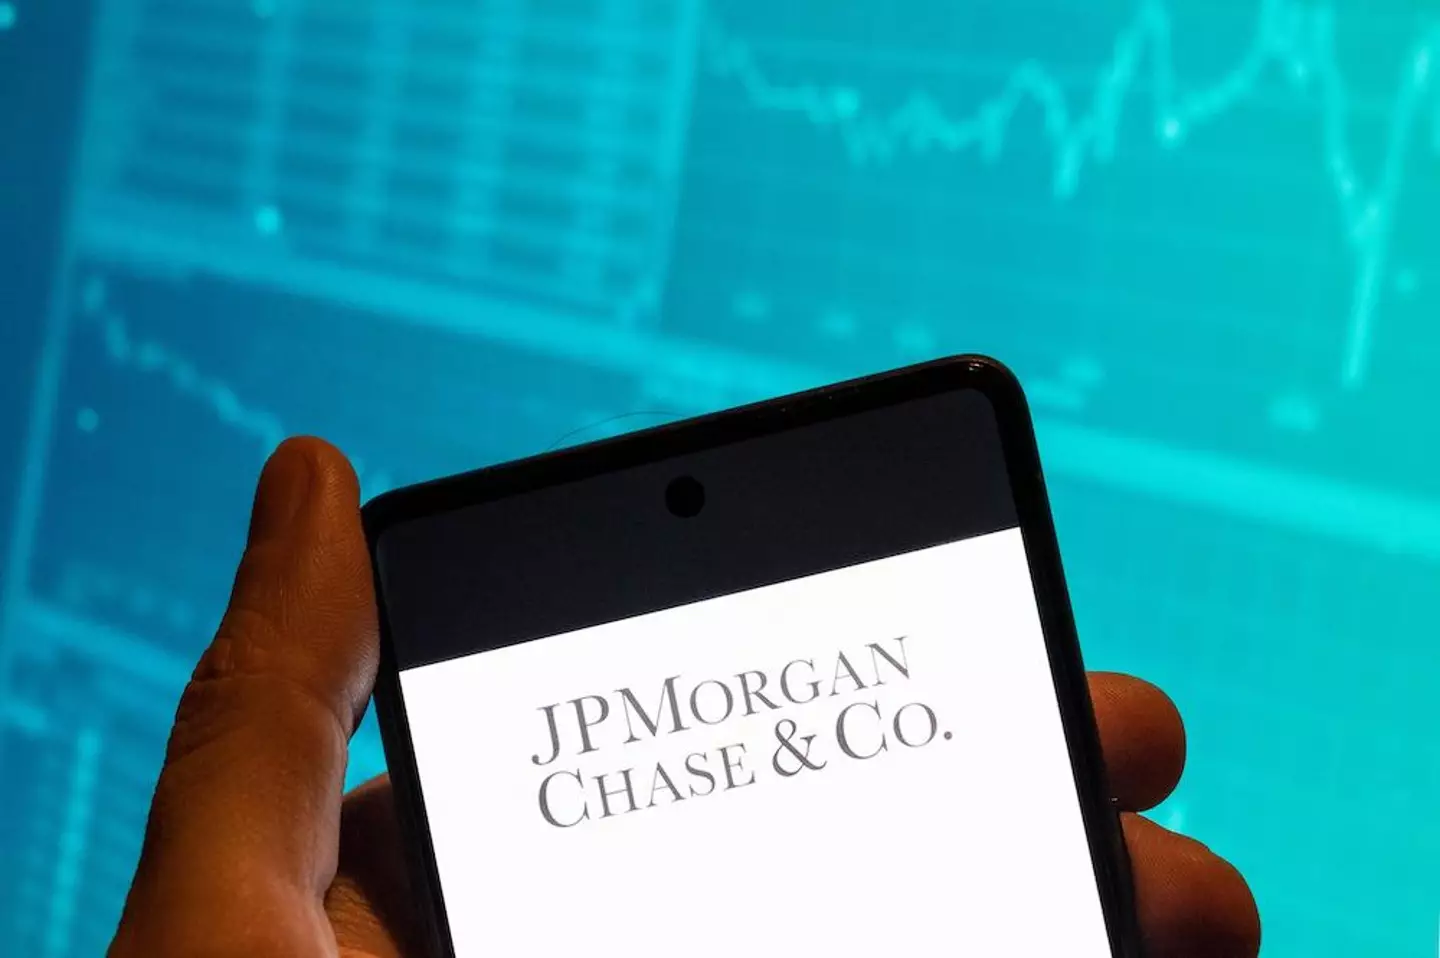 JPMorgan is one of the biggest financial institutions in the world.